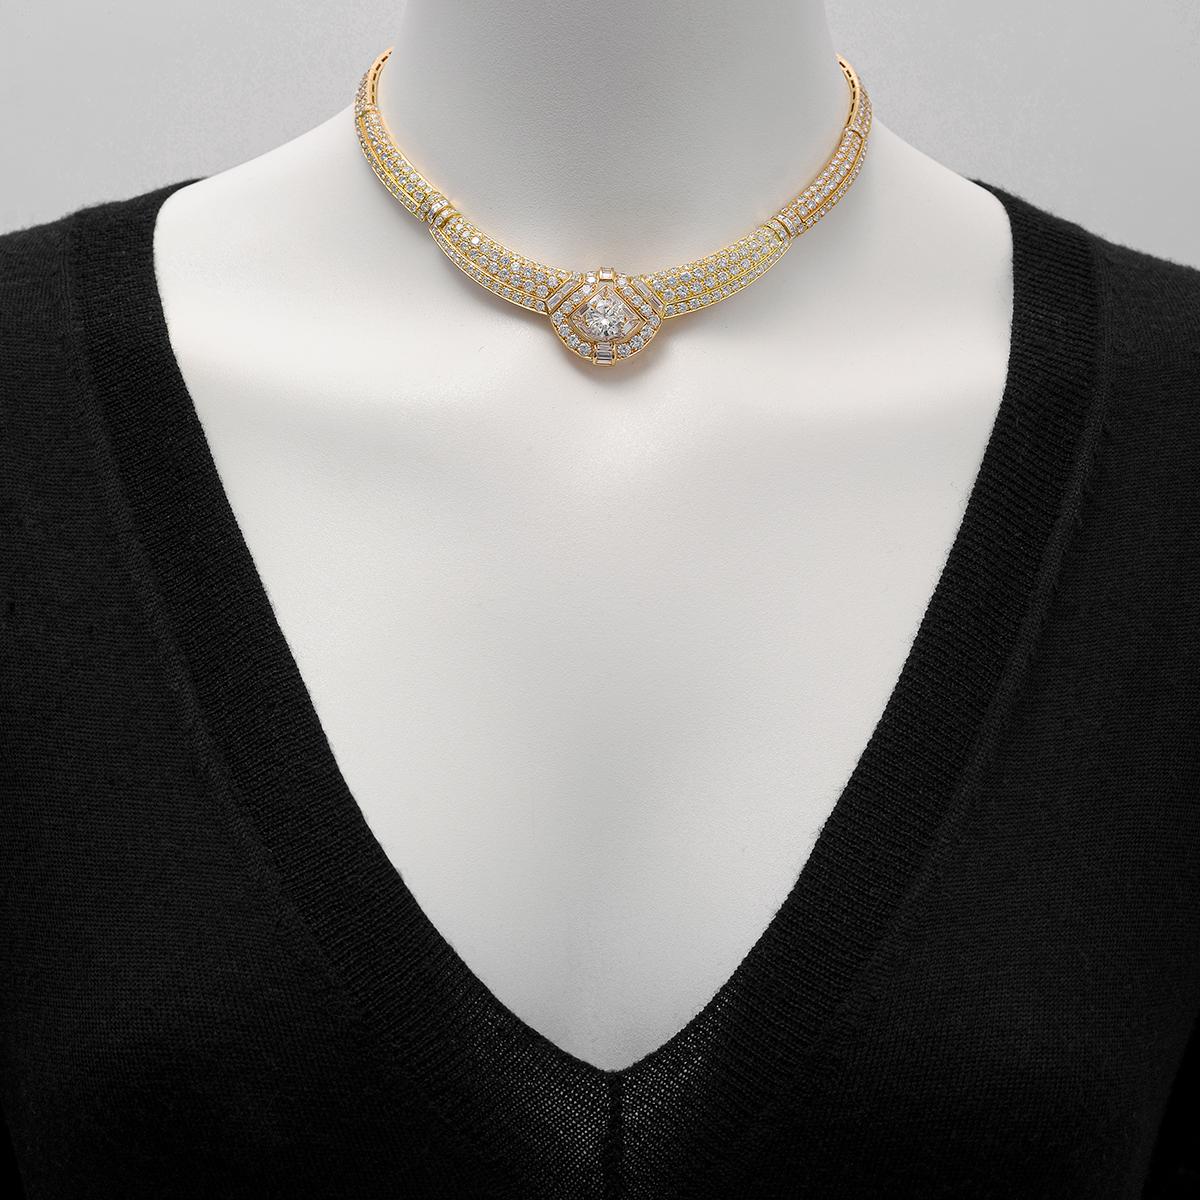 Boucheron Diamond Necklace and Earrings Set In Excellent Condition For Sale In Greenwich, CT